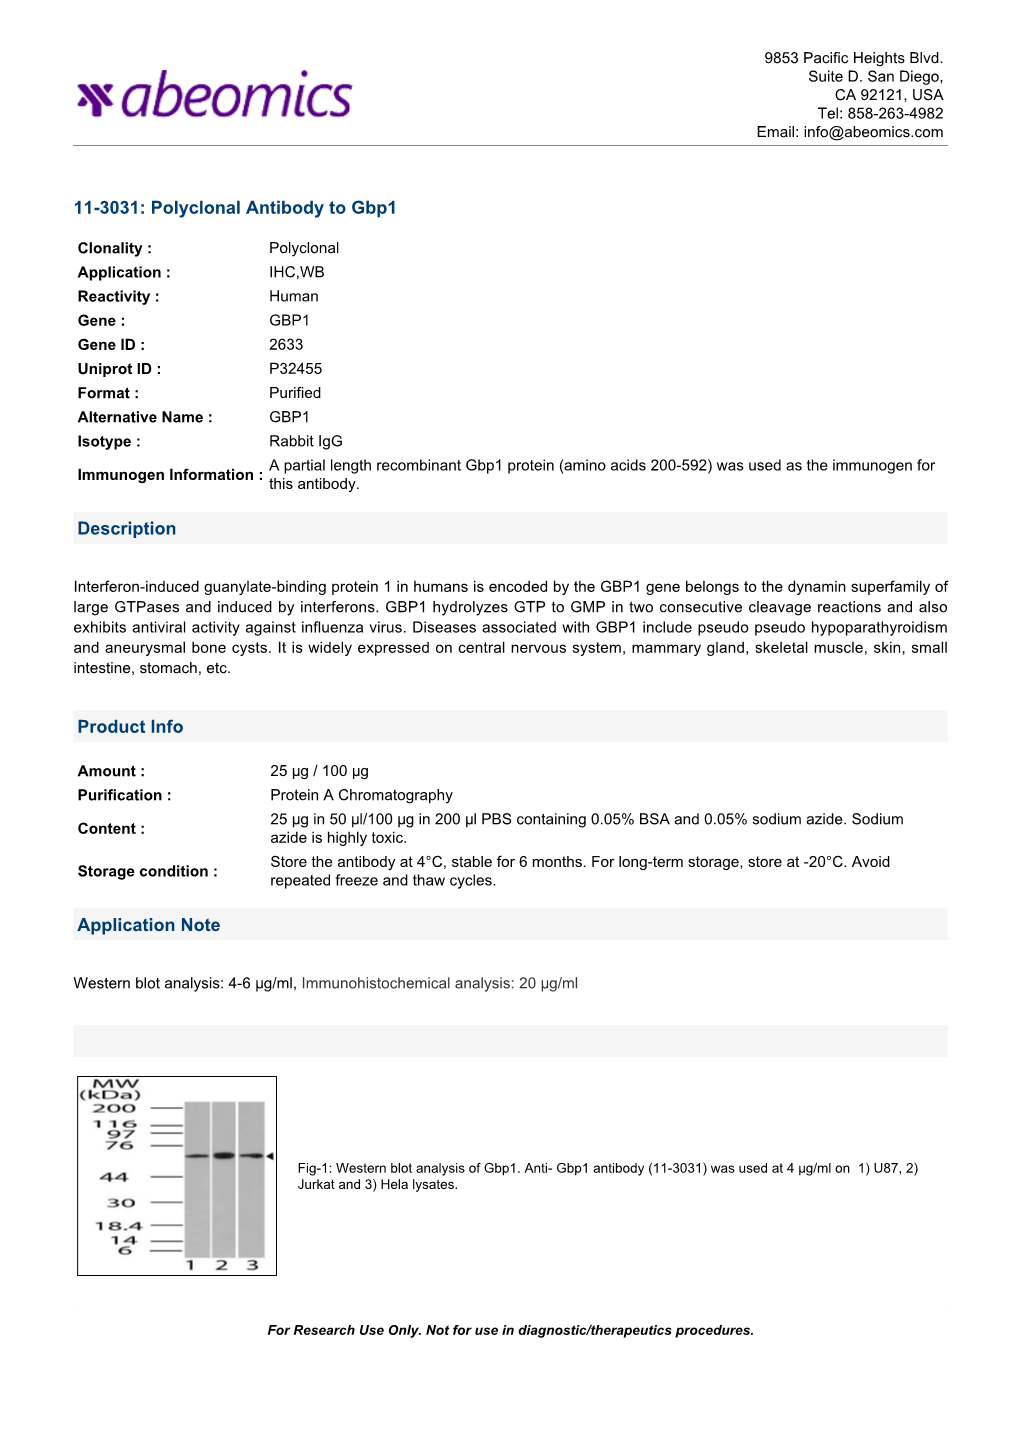 Polyclonal Antibody to Gbp1 Description Product Info Application Note